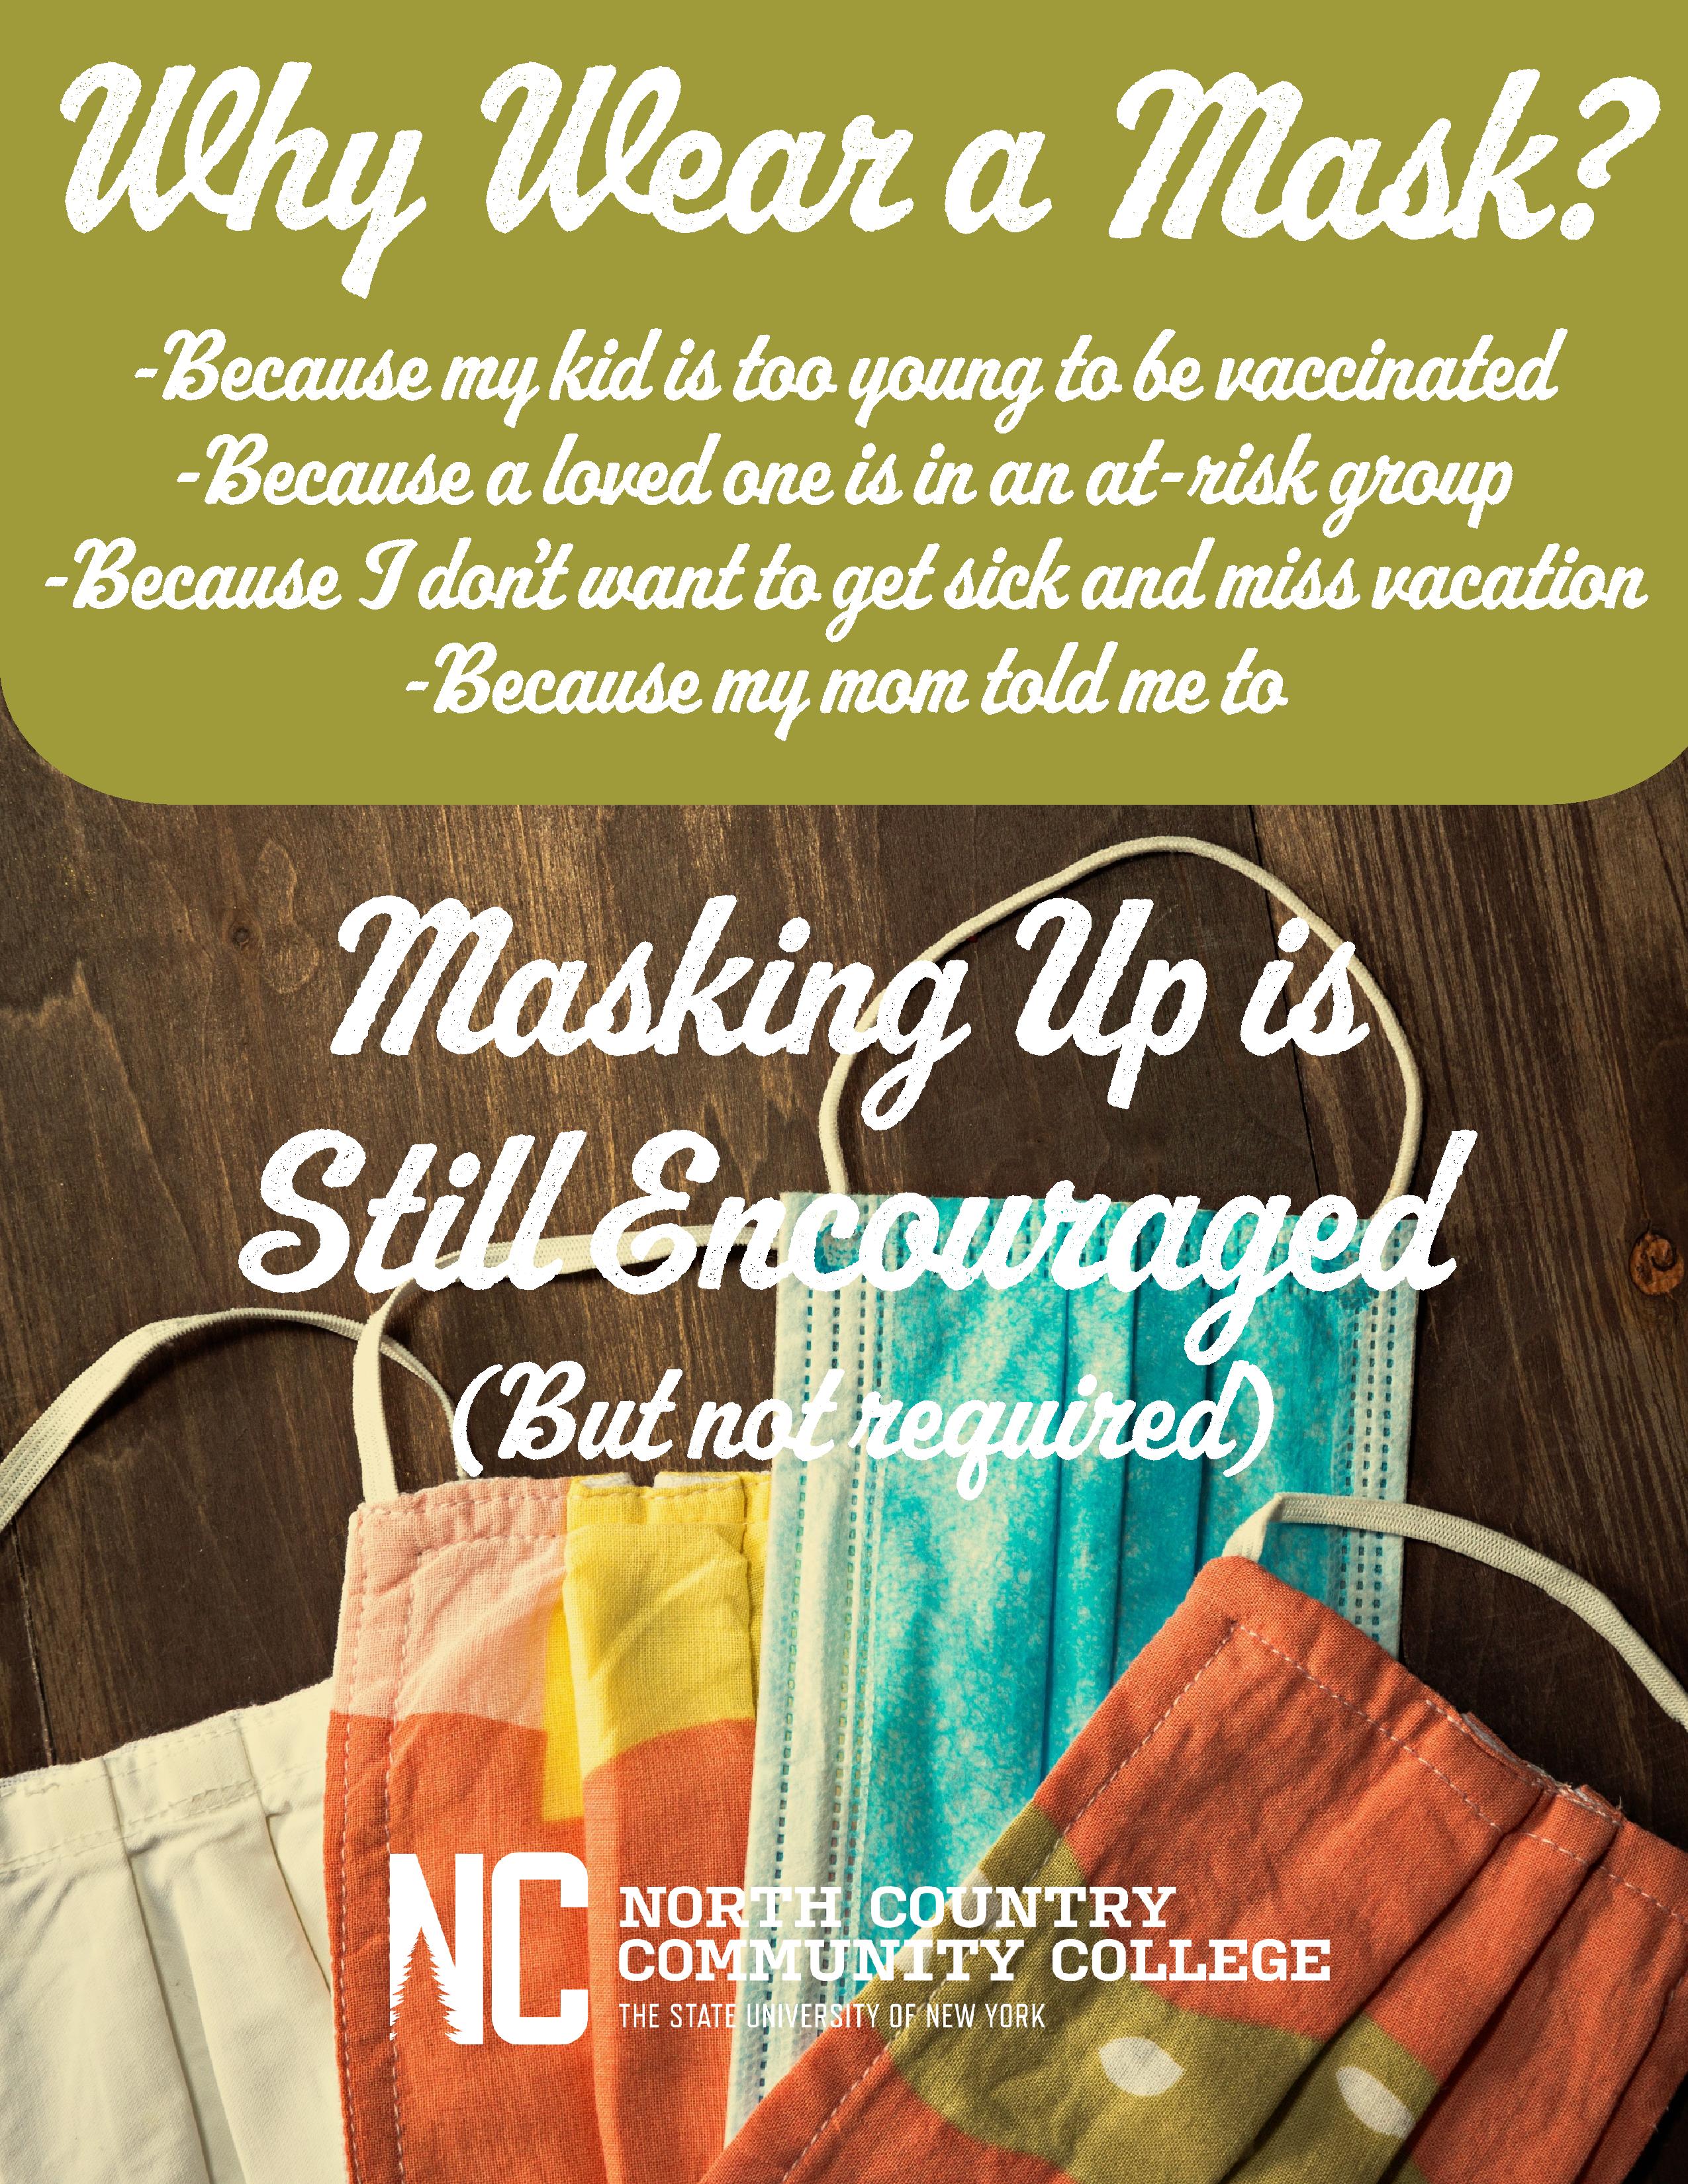 A flyer outlining why masks are still encouraged